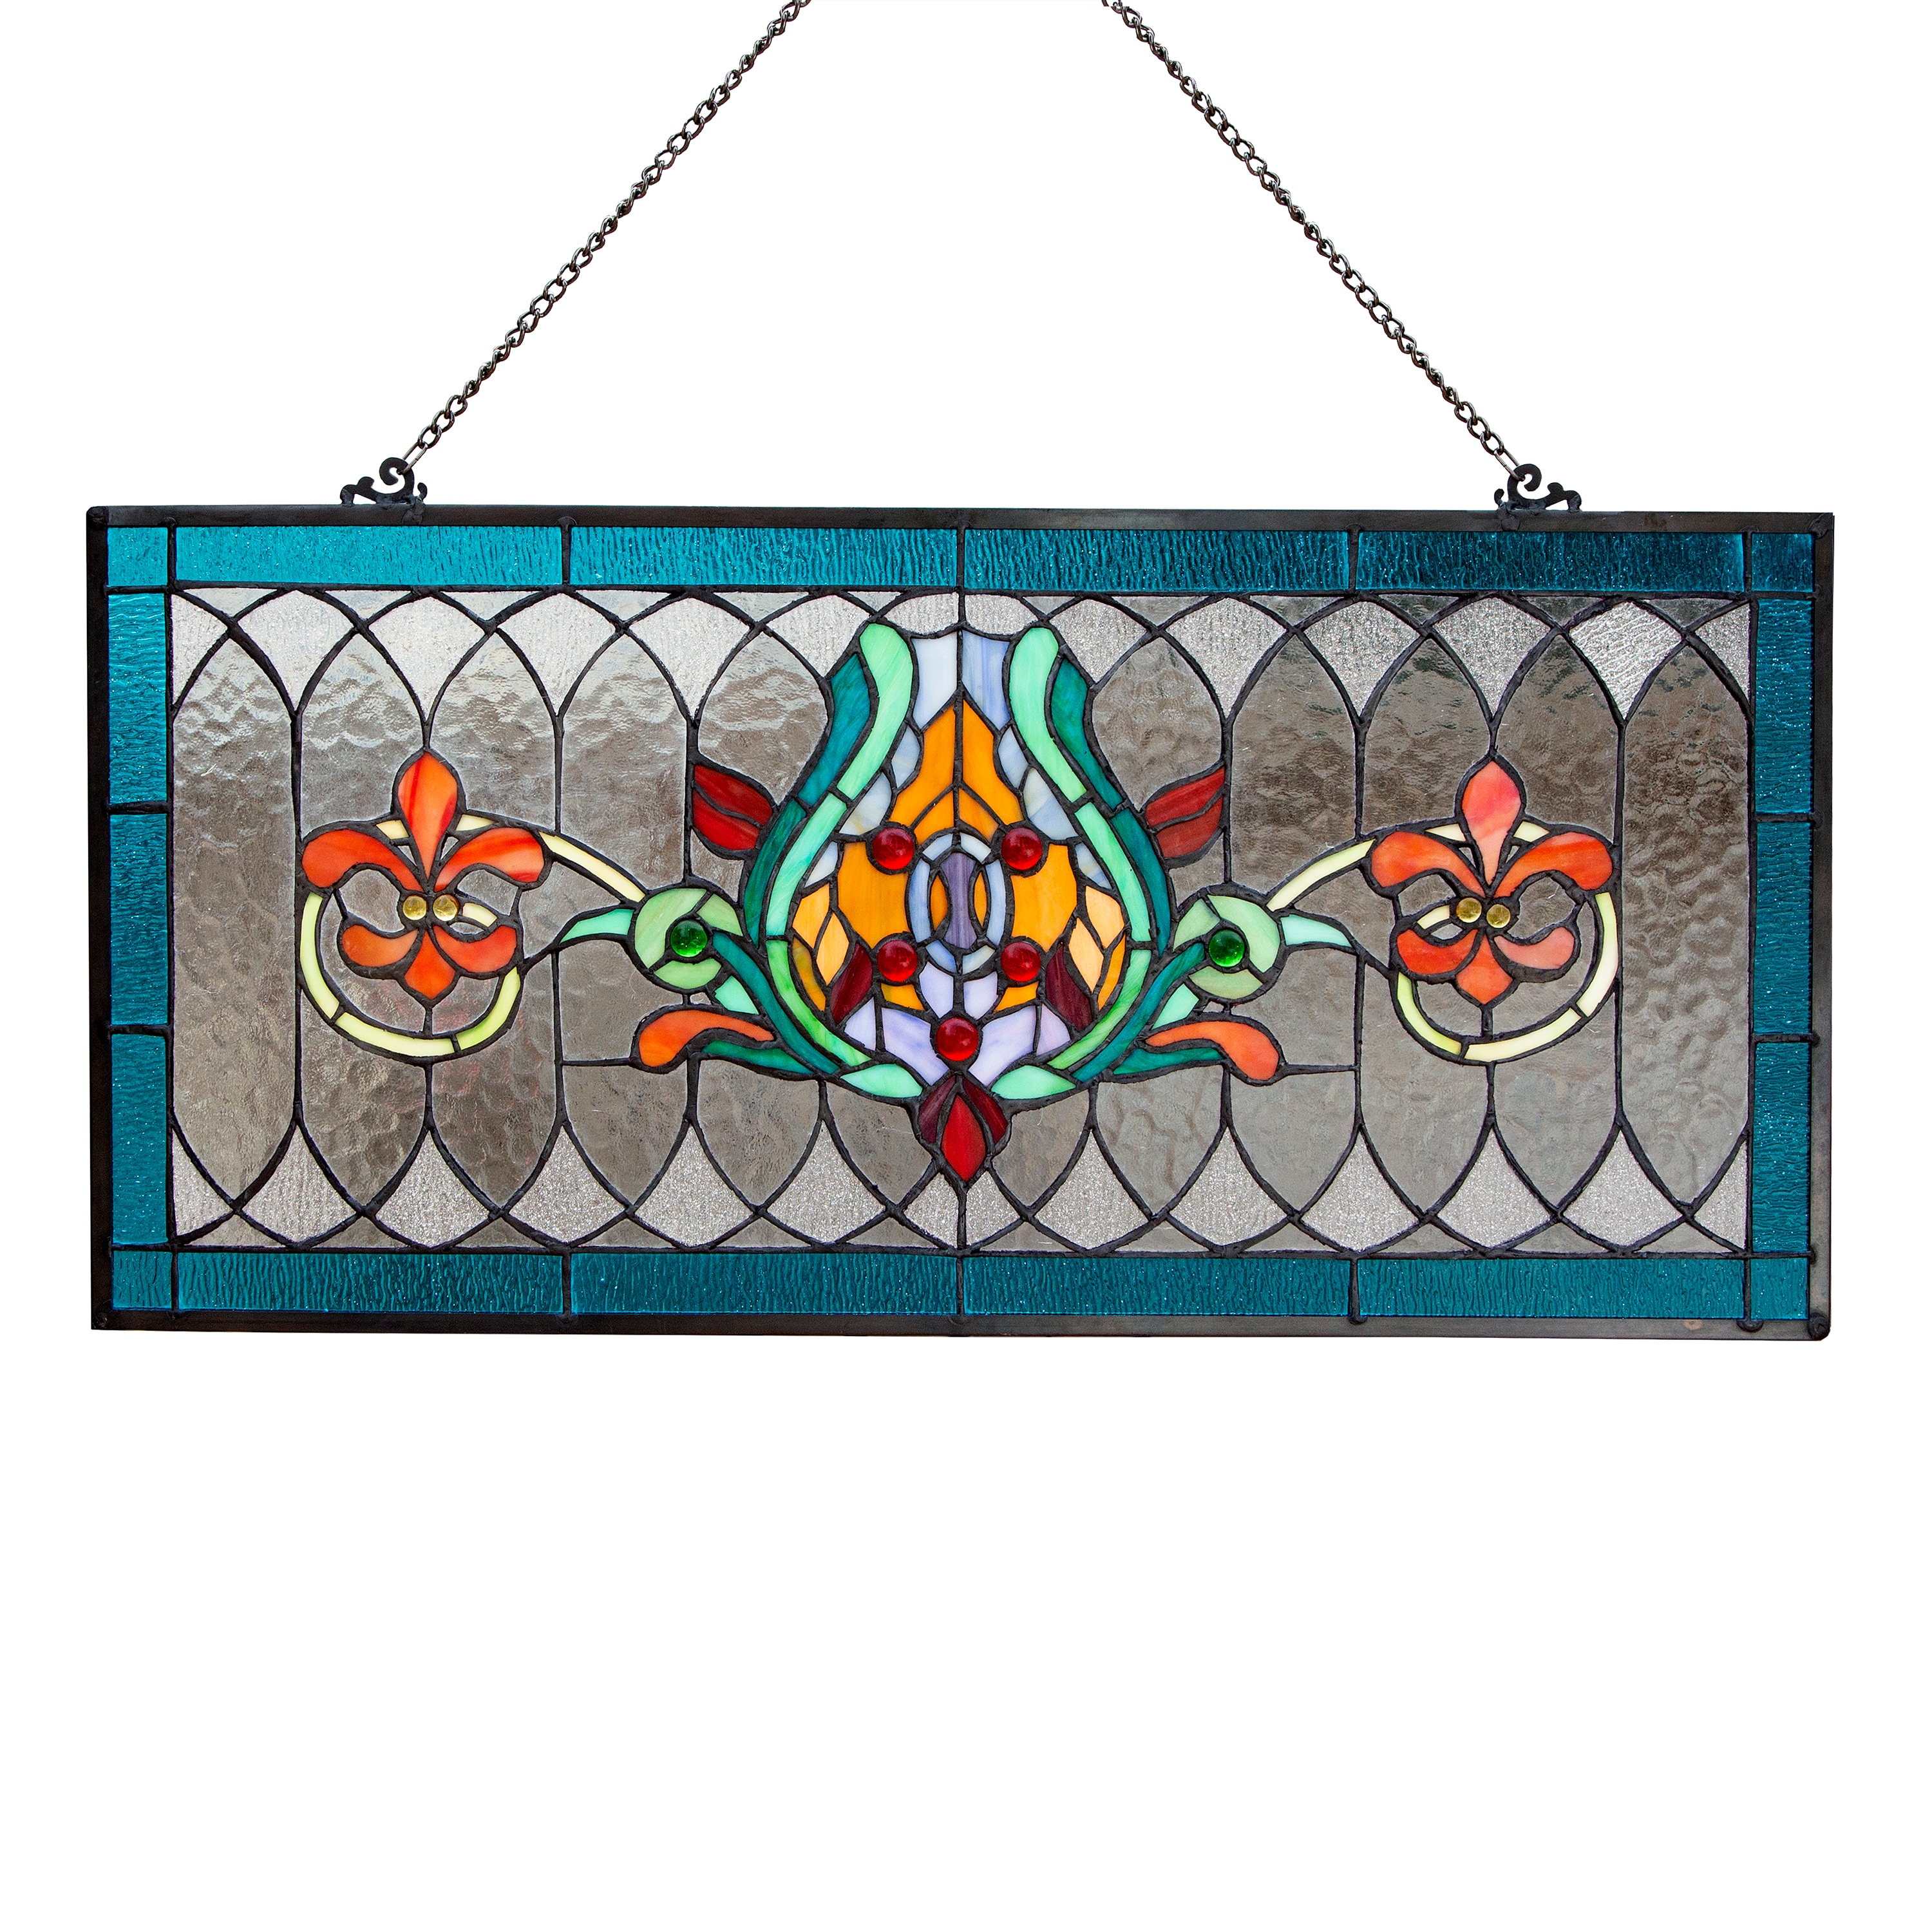 Hanging Faux Stained Glass Panels (Made with Laminating Pouches, Alcohol  Ink, and Vinyl Decals)